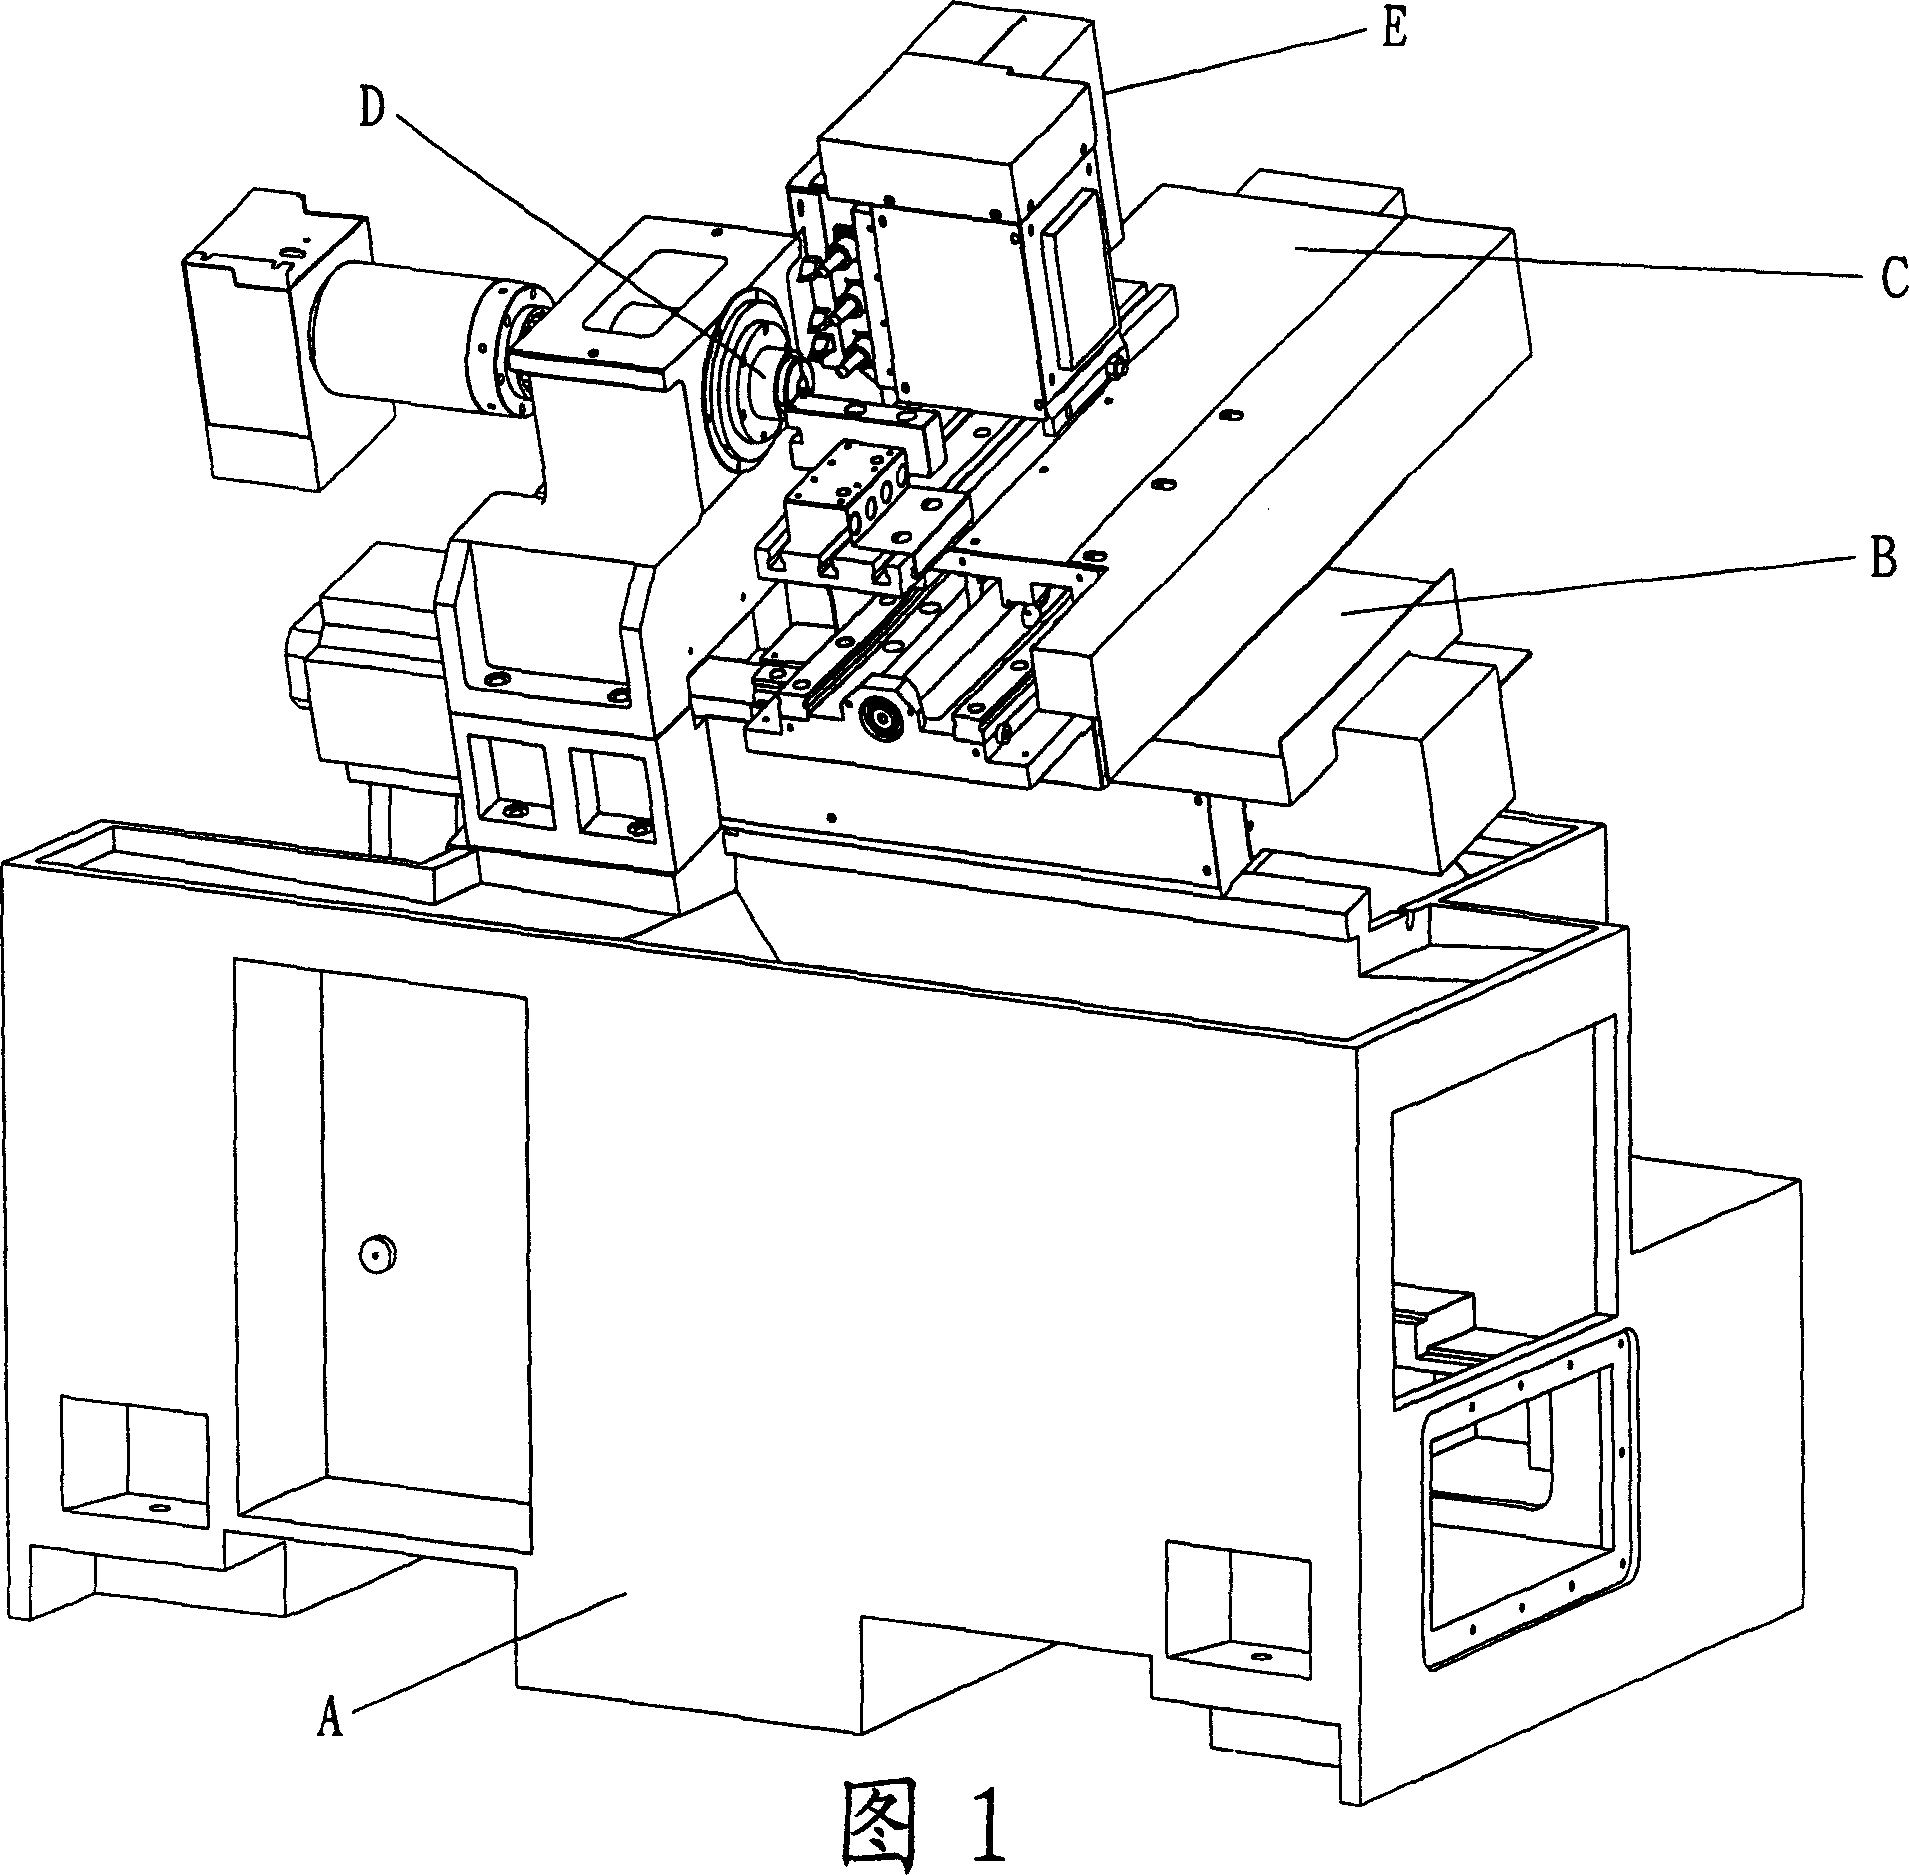 Axial-displacement cutter carriage structure of miller